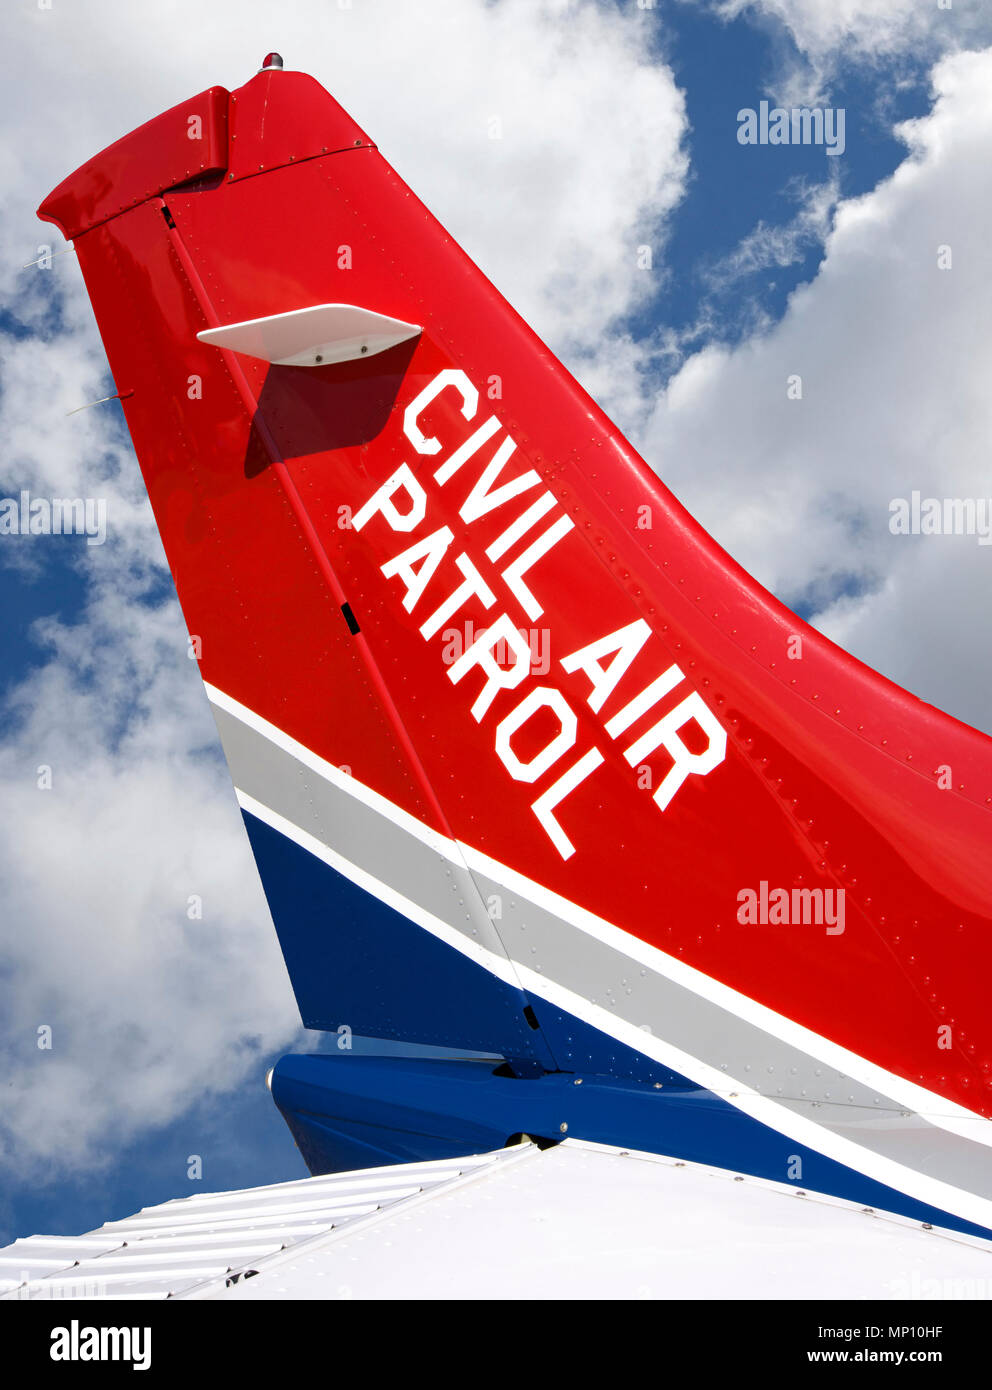 Civil Air Patrol aircraft tail against sky background. Stock Photo